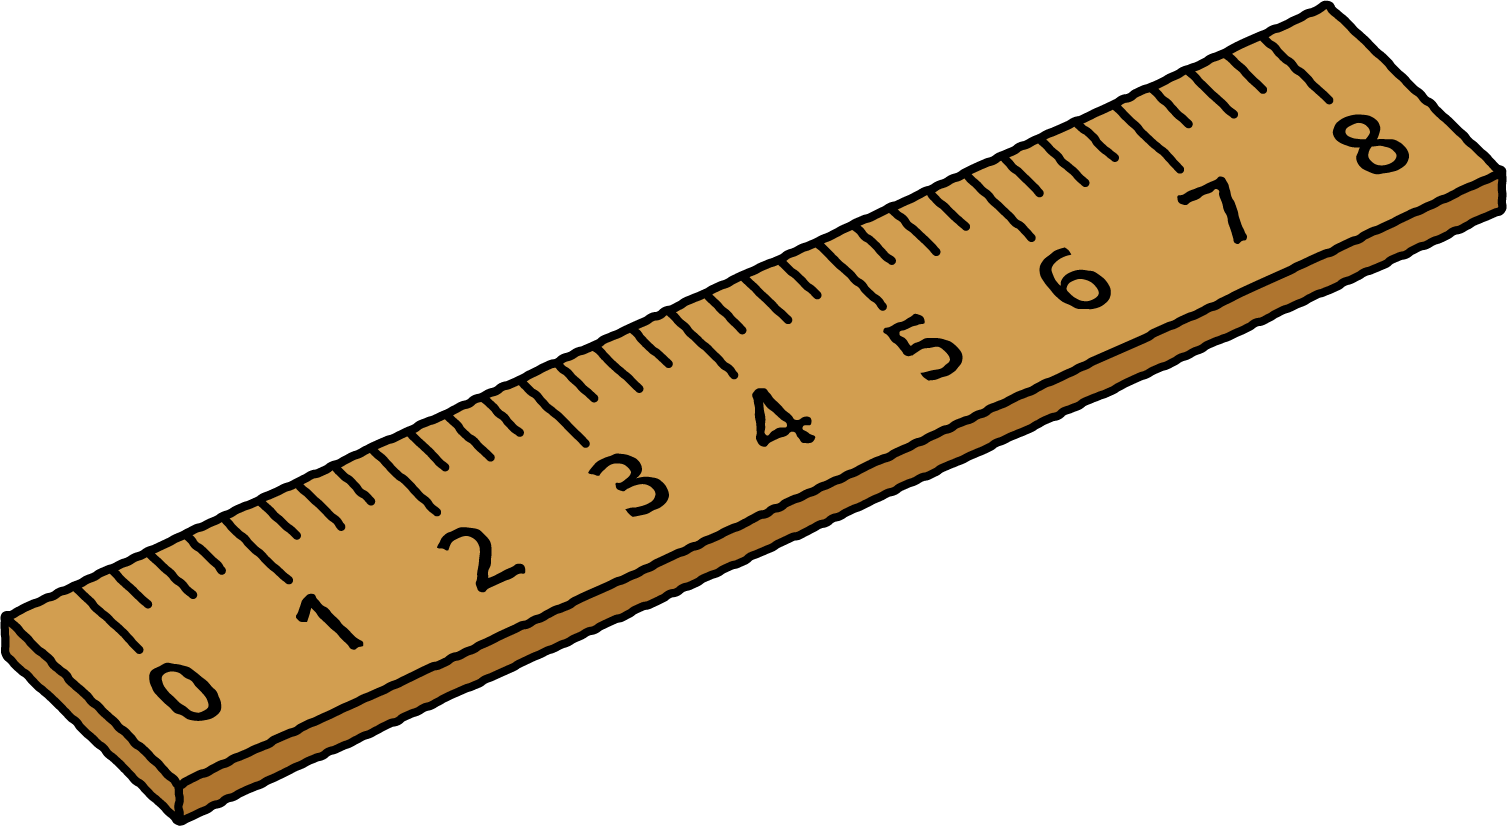 Picture of ruler. Scale, 0 to 8, by 1's. 4 tick marks between each unit.